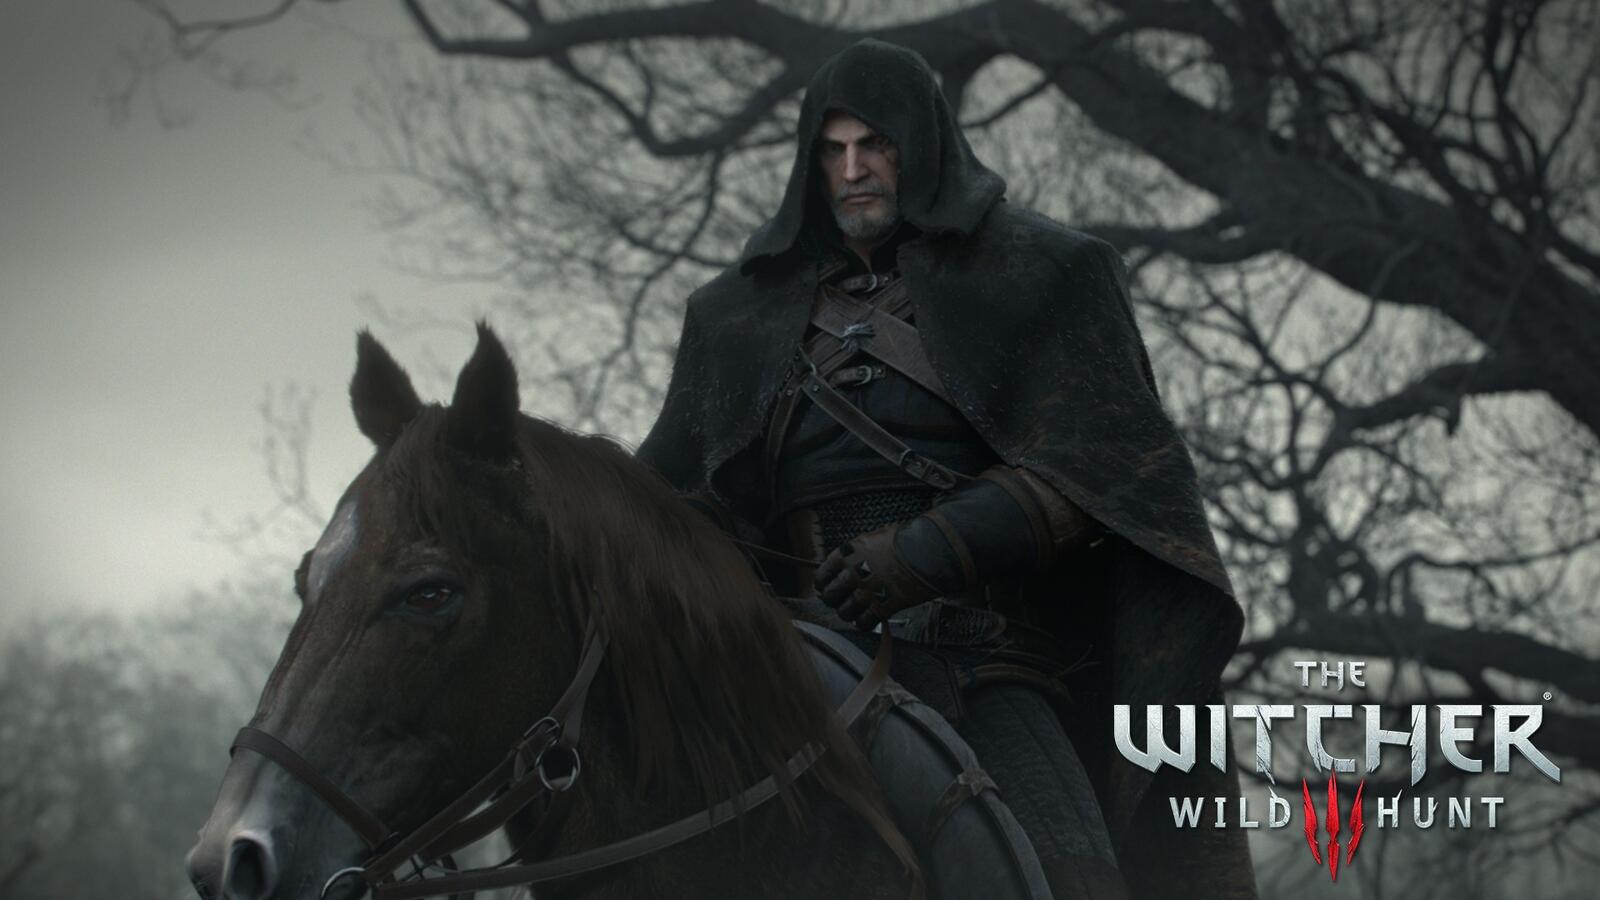 Free photo Screensaver from The Witcher 3 Wild Hunt